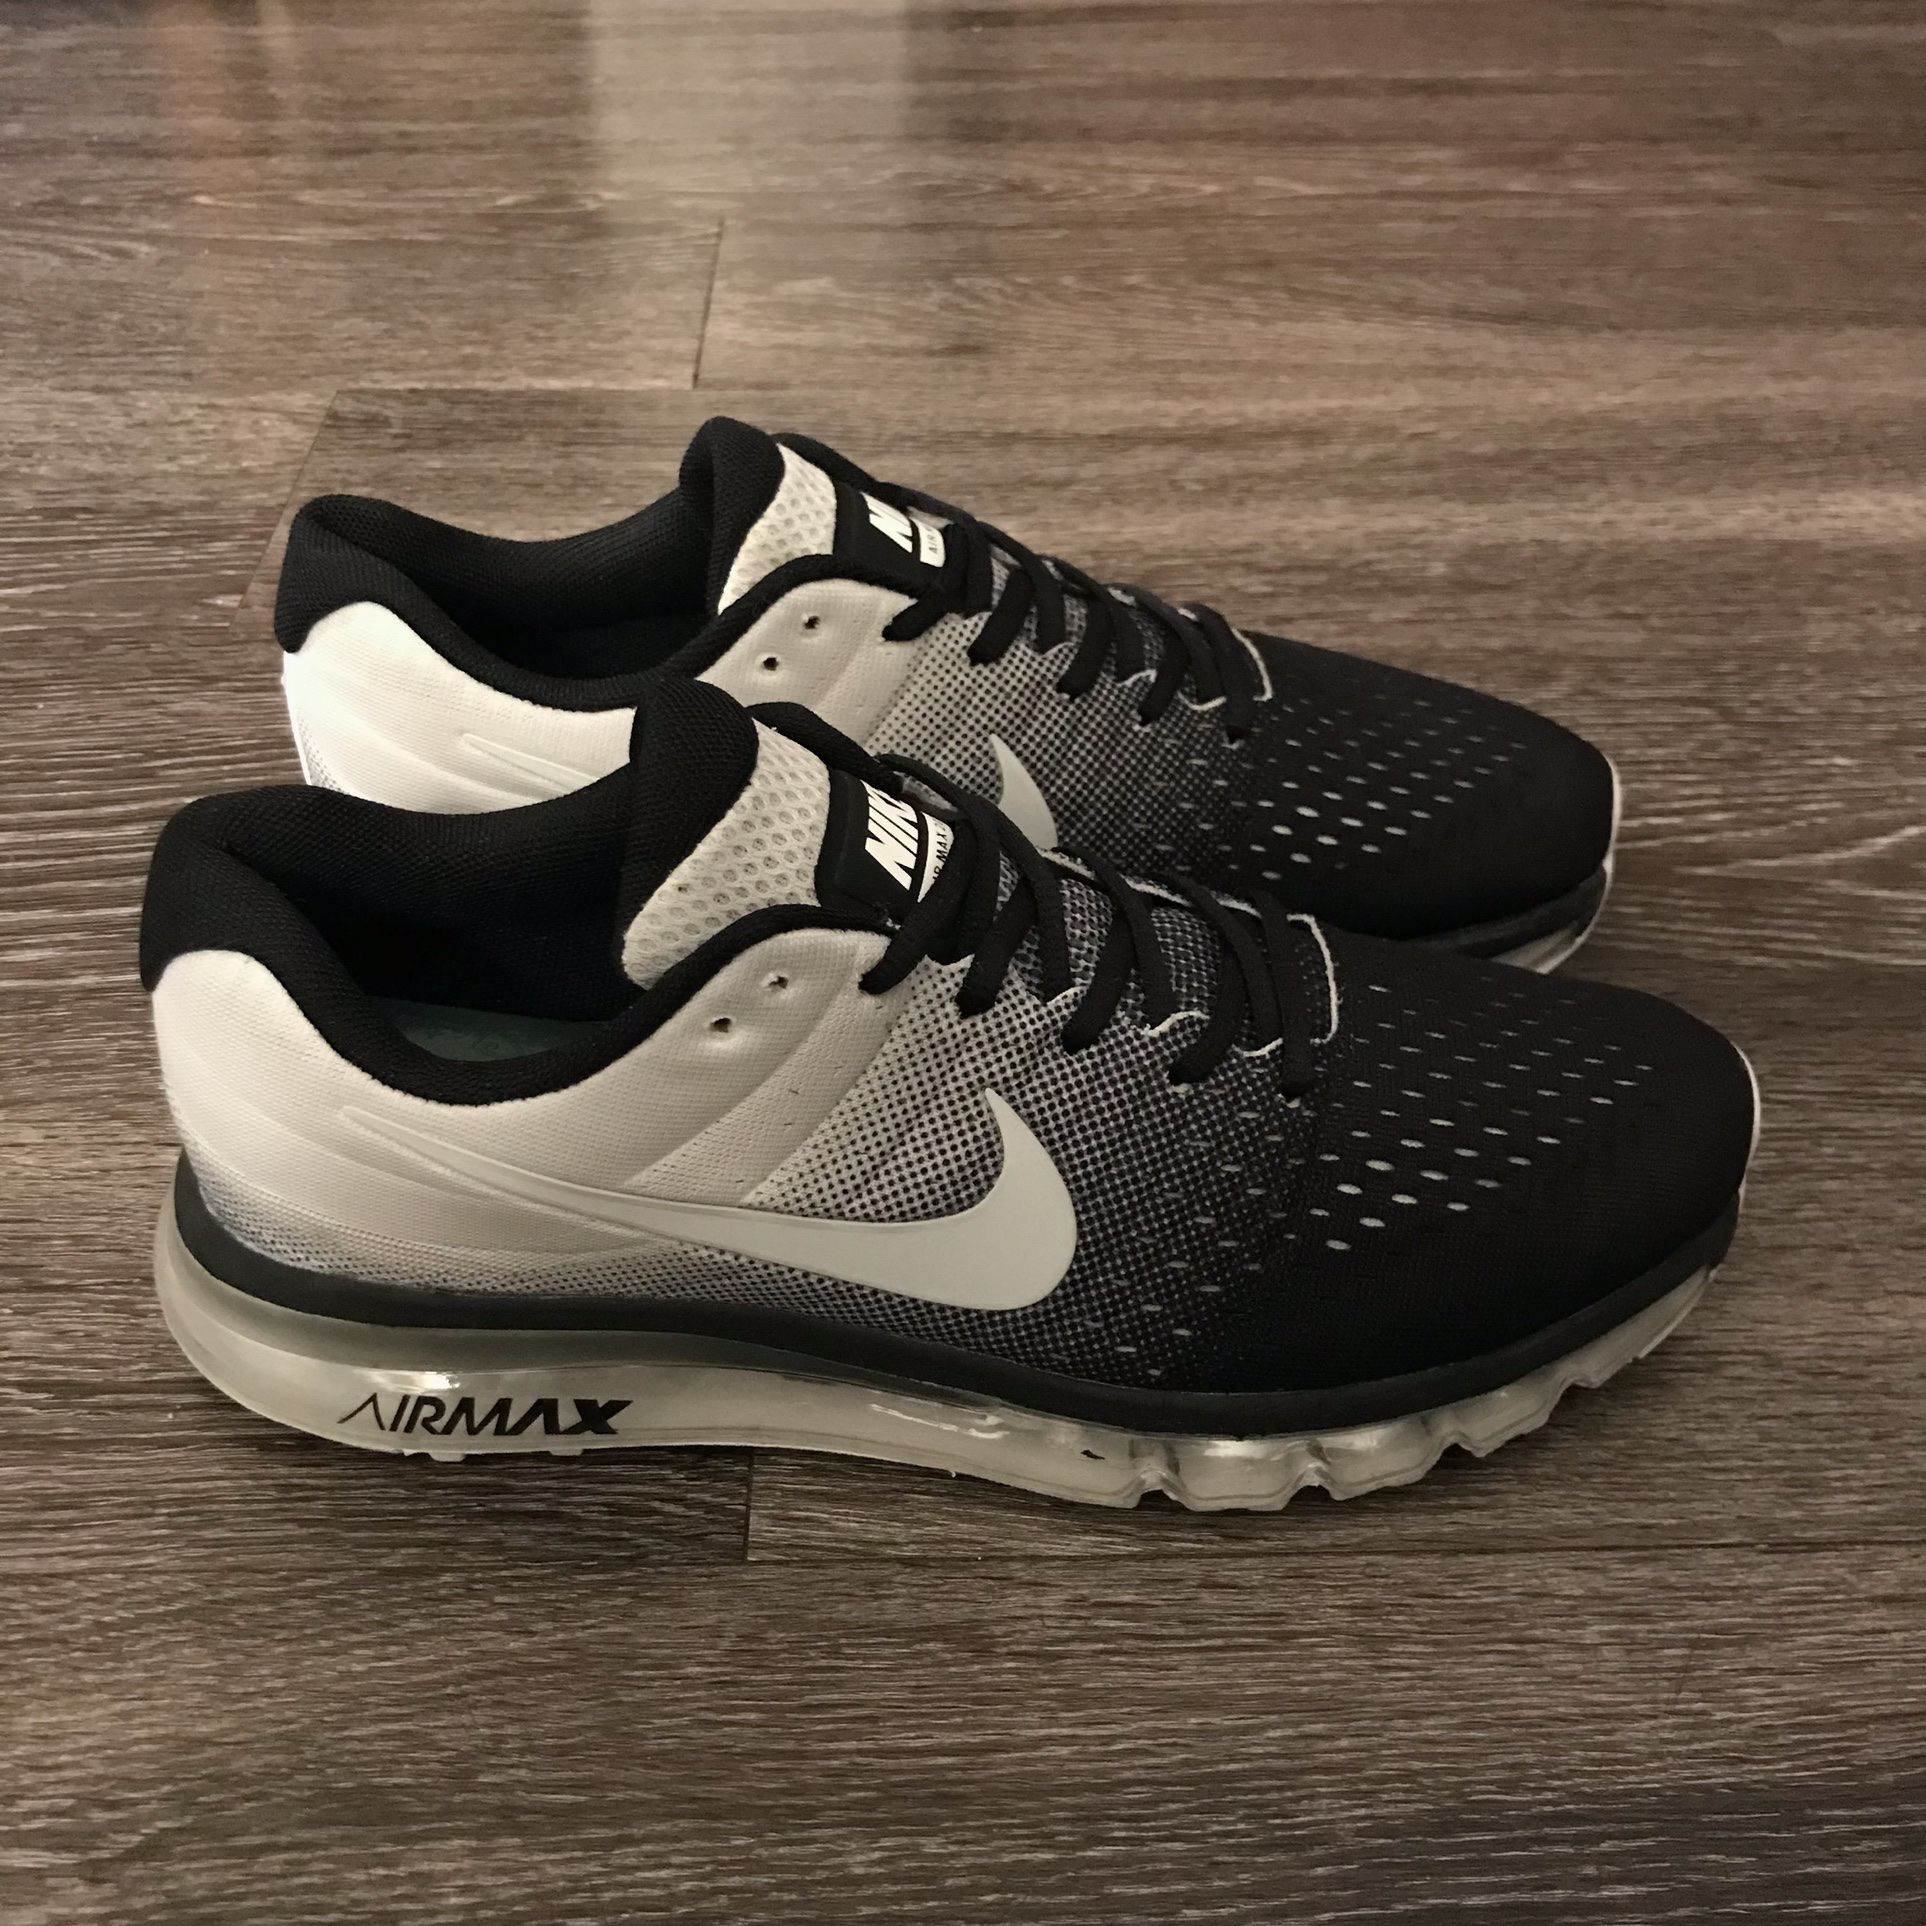 grens Inconsistent Koninklijke familie Nike Air Max 2017 Size 8.5 Mens Good Condition for Sale in San Antonio, TX  - OfferUp